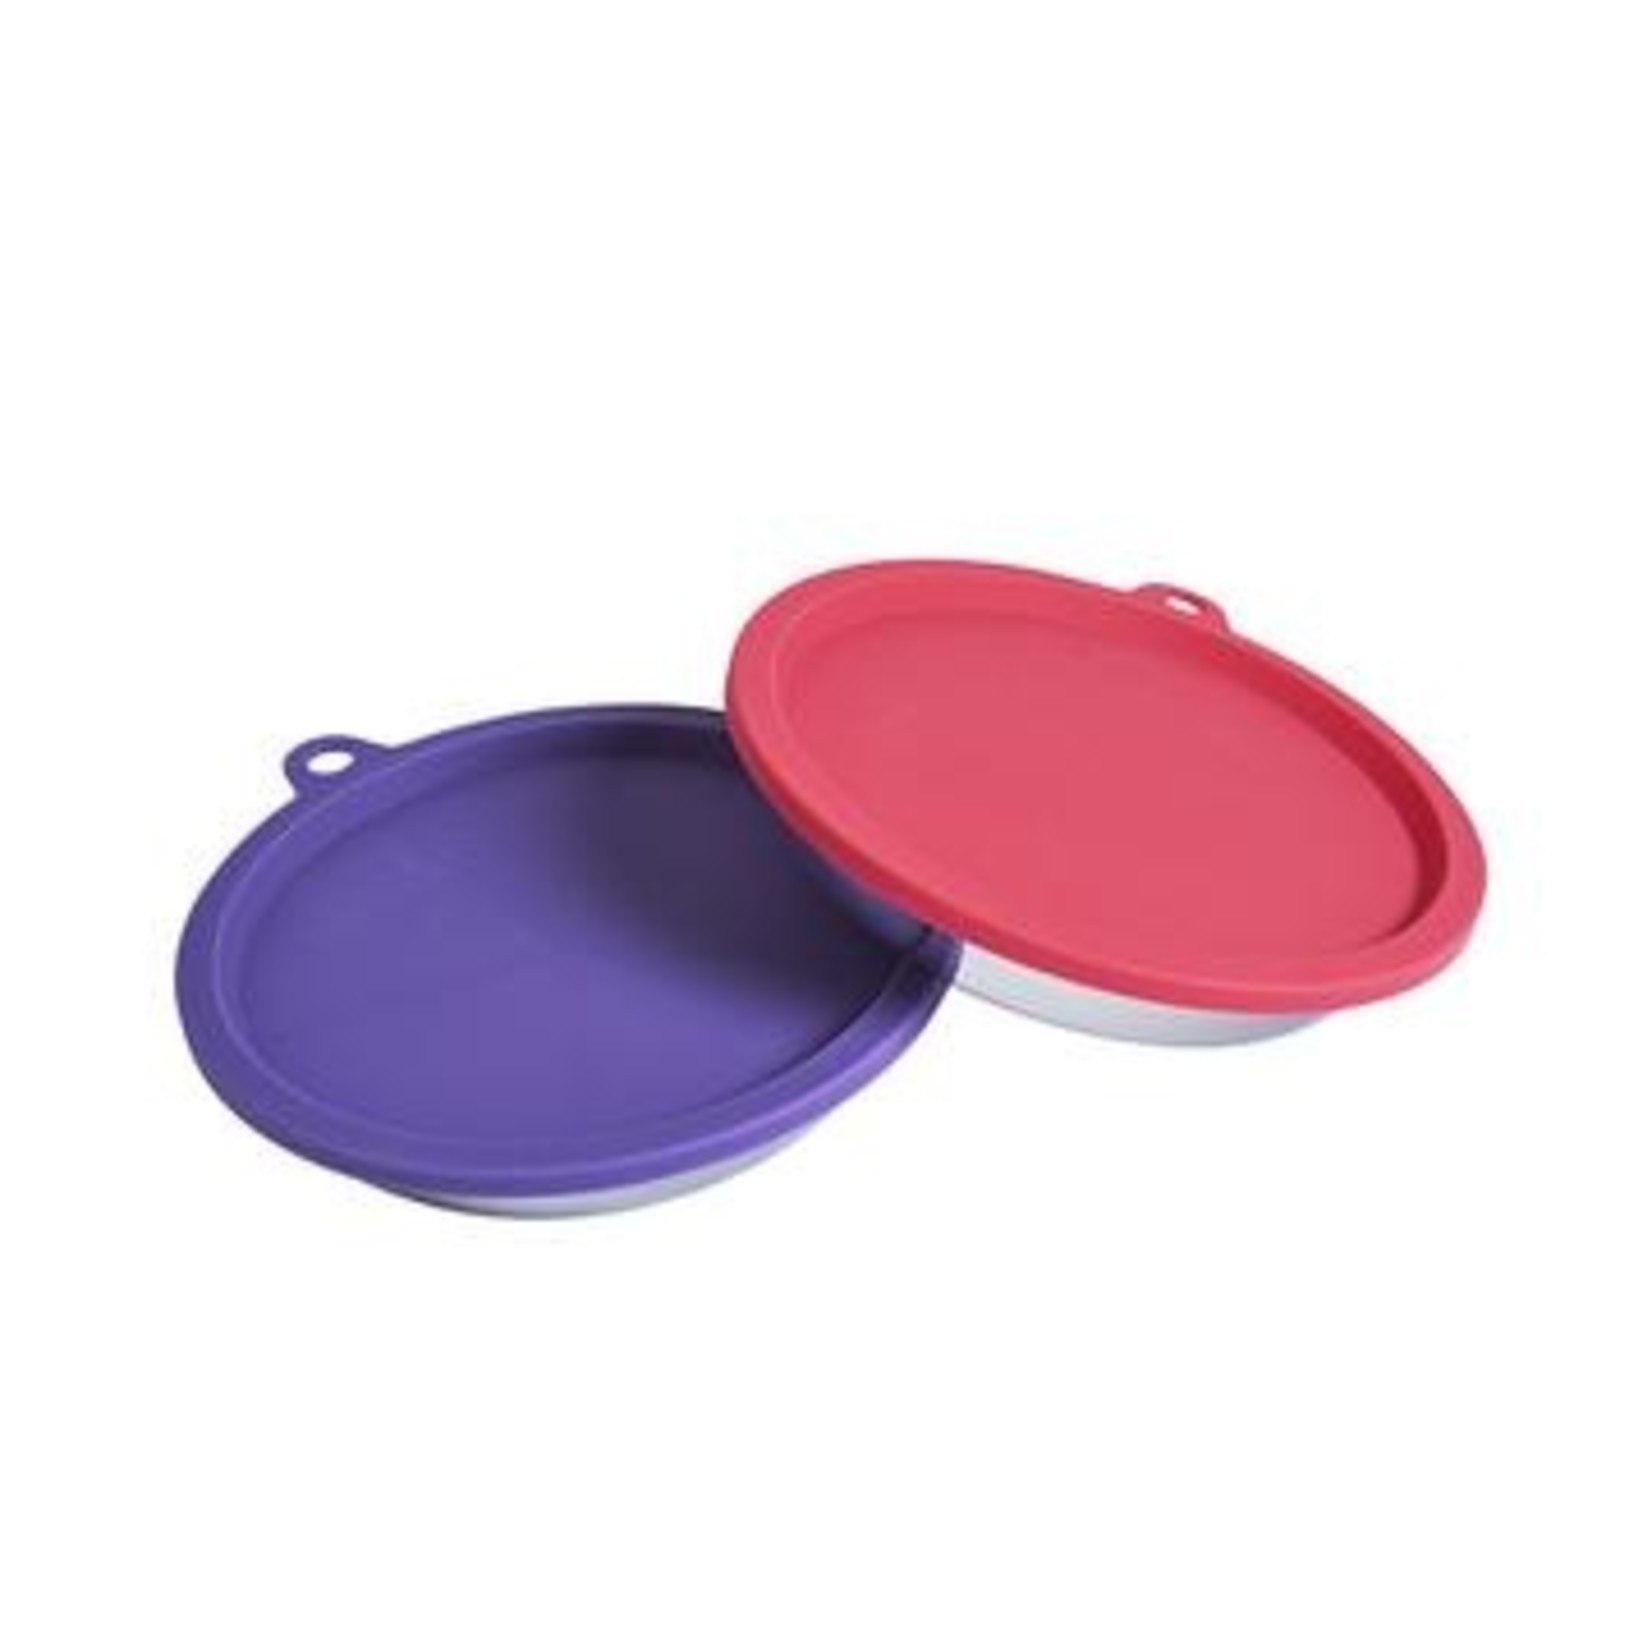 Messy Mutts MM CAT 4 PC BOX SET 2 SS BOWLS 2 SILICONE LIDS